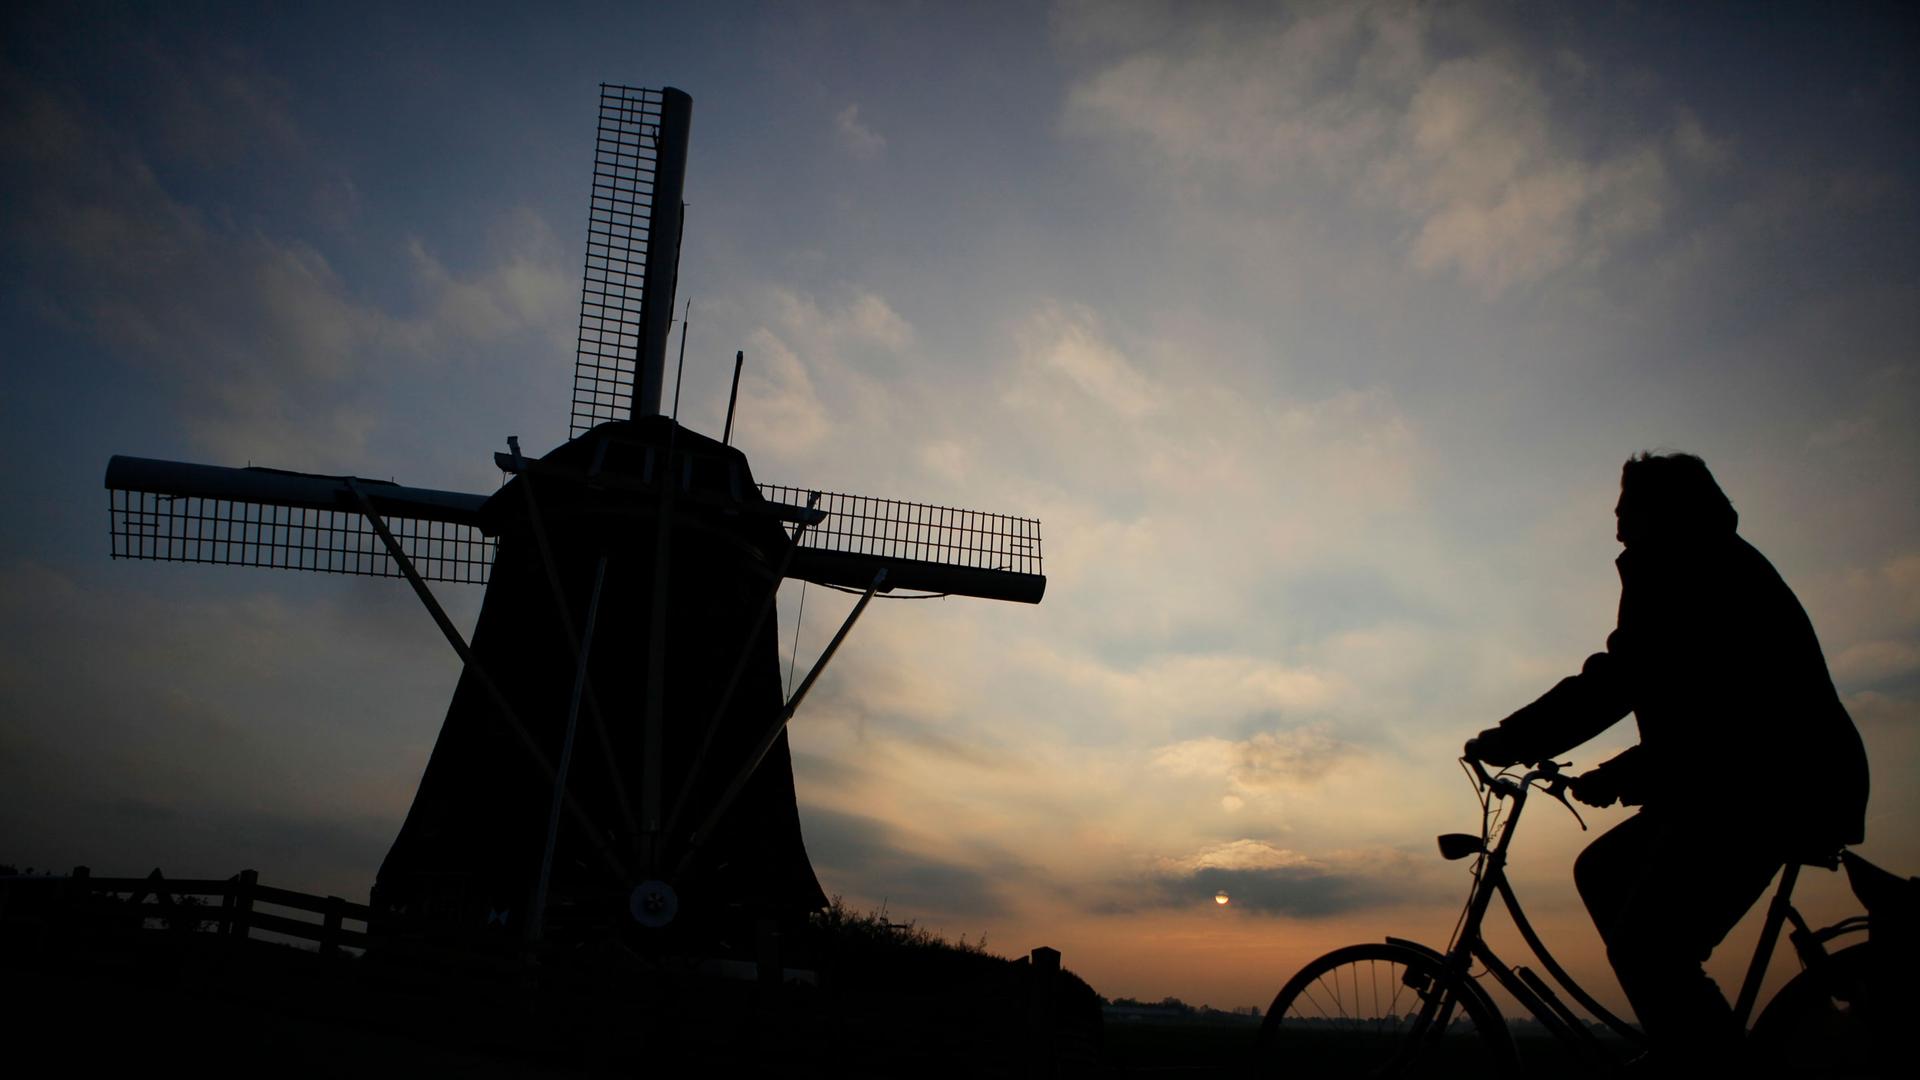 A woman rides her bicycle toward Broekzijdse Molen windmill as the sun sets between the villages of Abcoude and Driemond, near Amsterdam, Netherlands, Saturday Oct. 29, 2011.